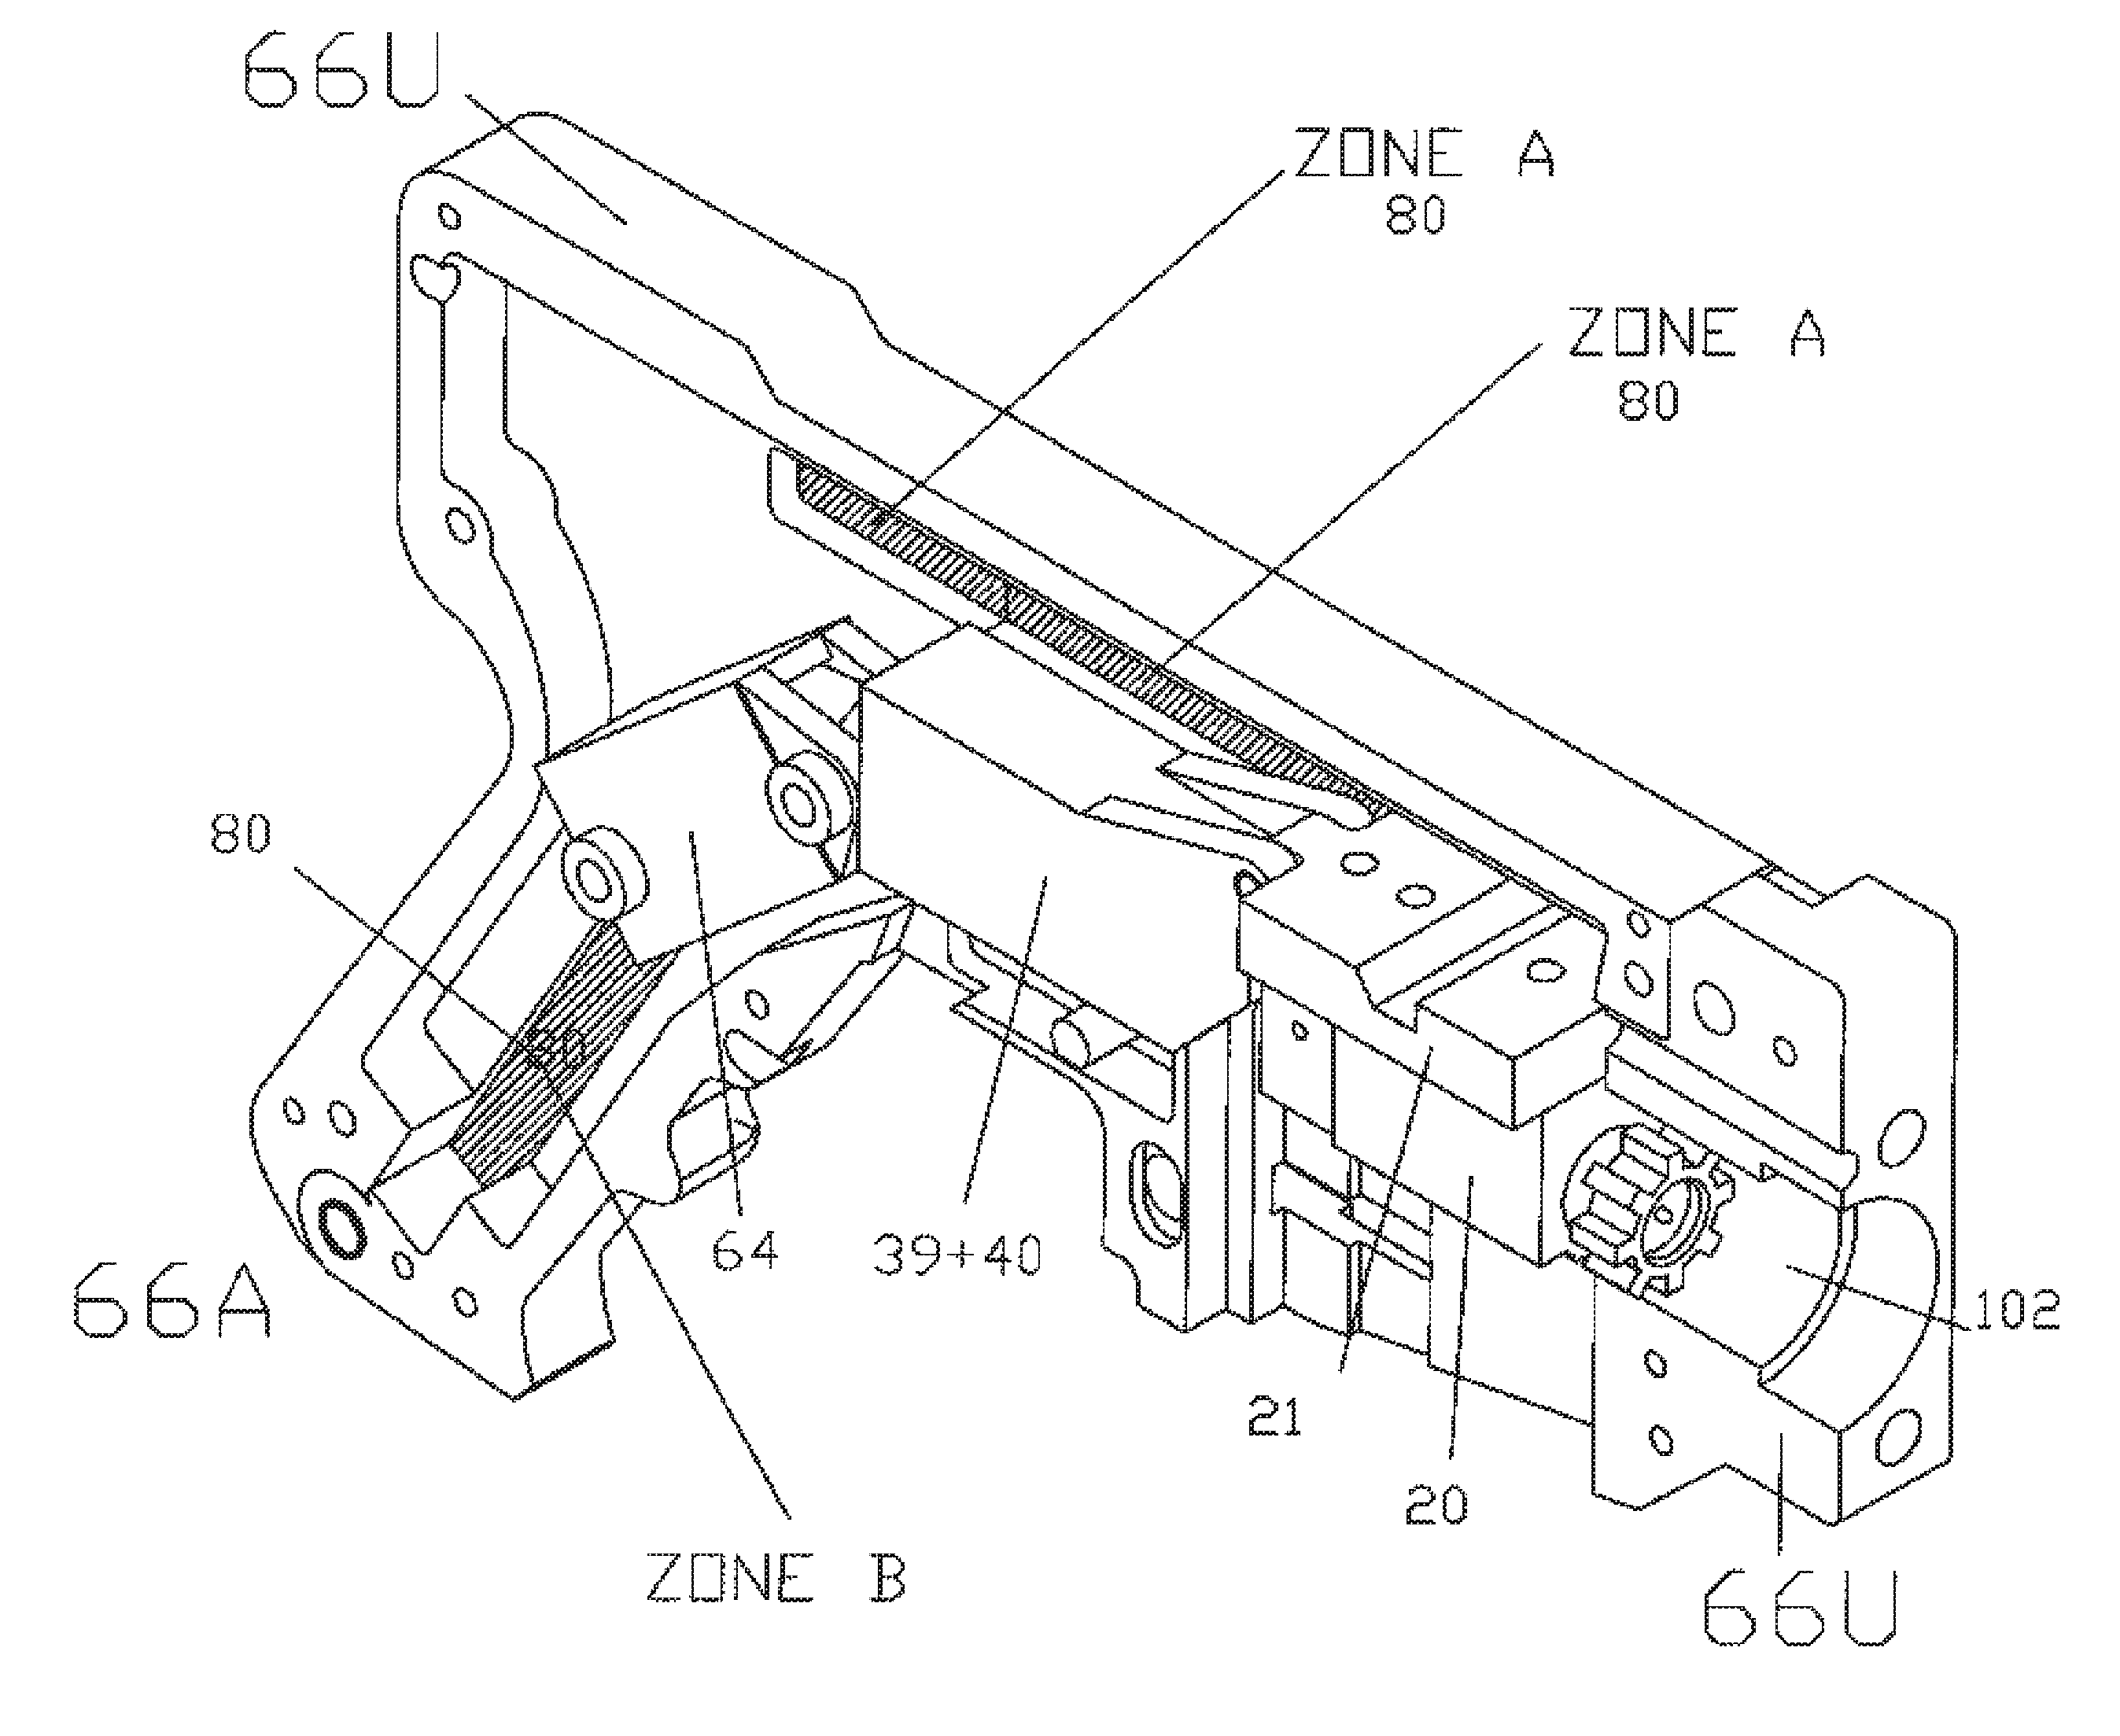 Operating system utilizing an articulated bolt train to manage recoil force